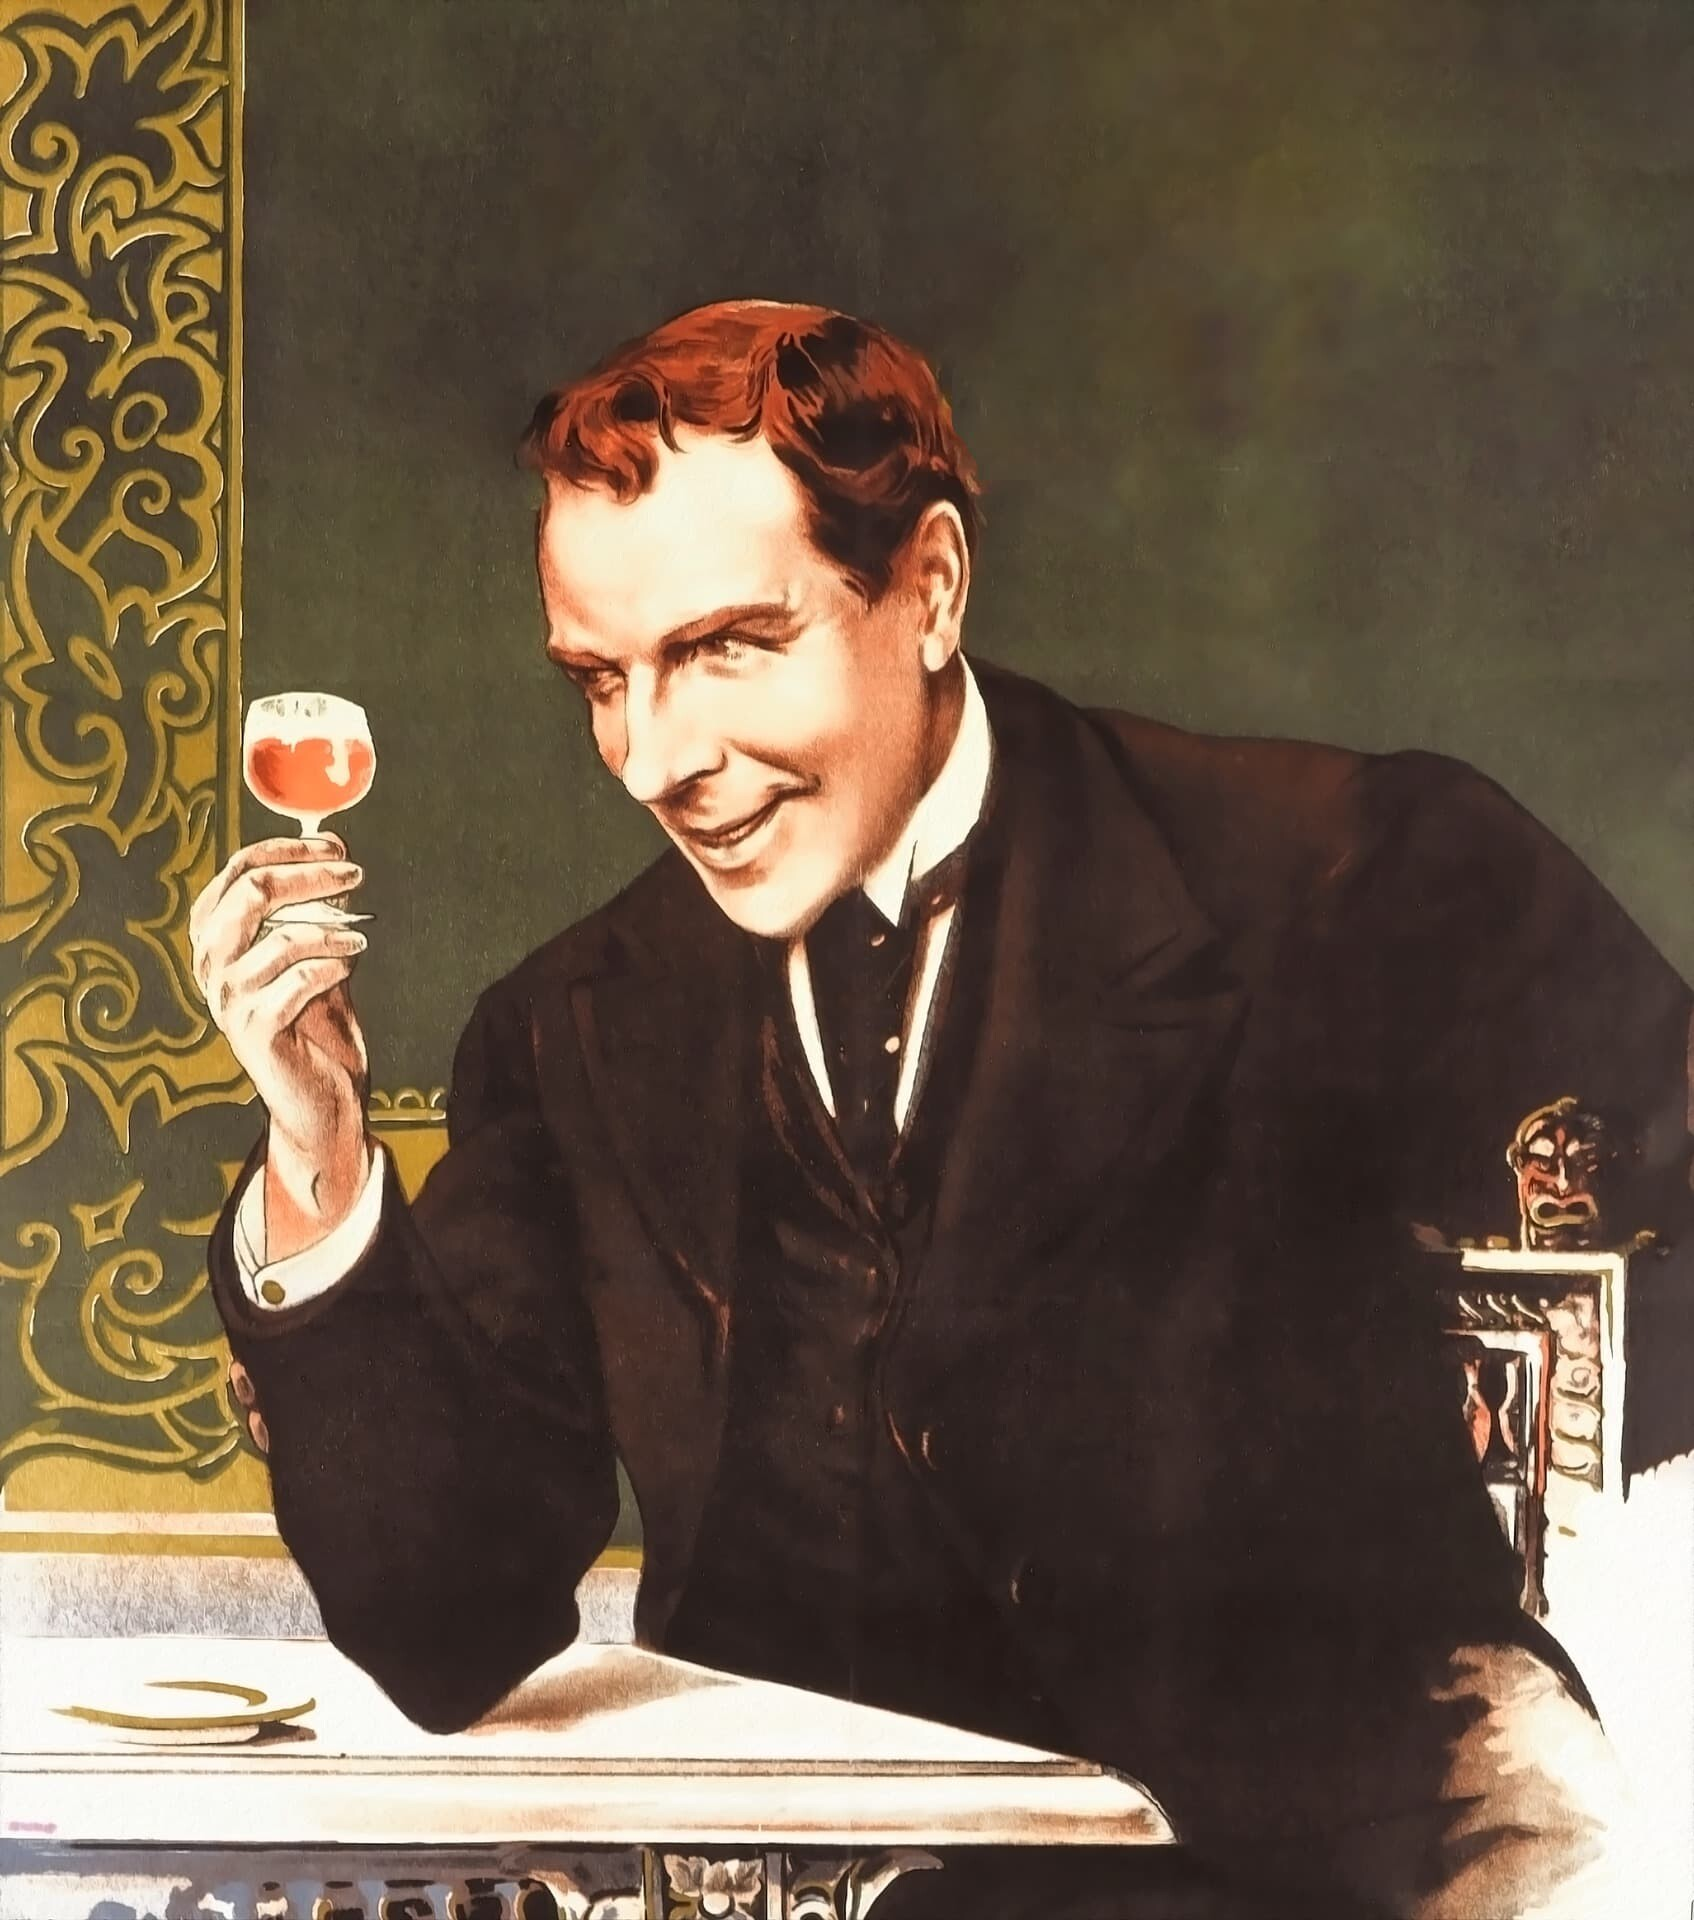 Painting from prohibition era of man drinking